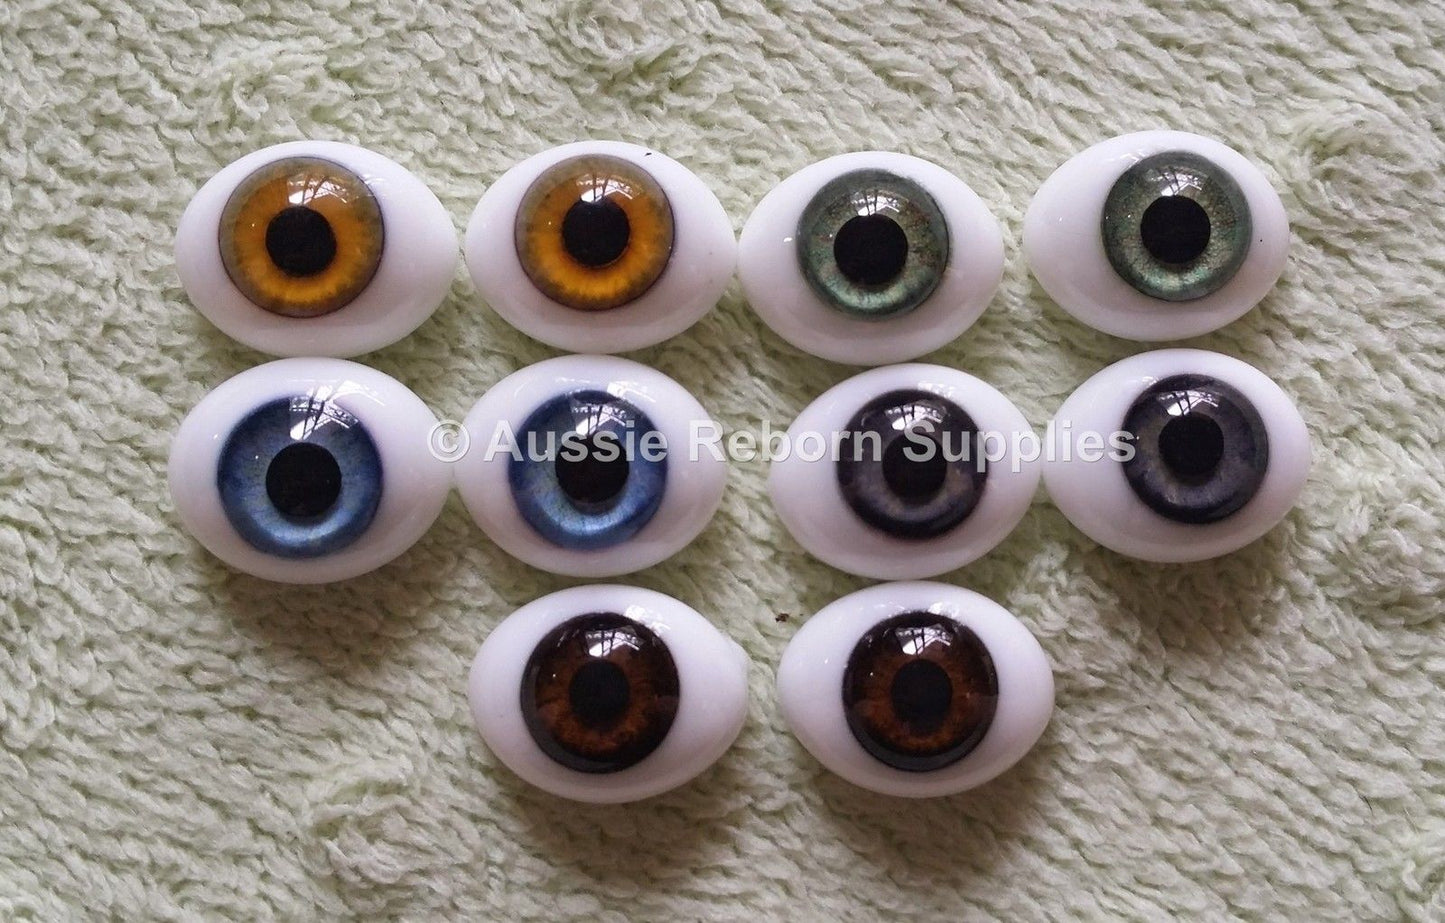 12mm Grey Blue Oval Glass Eyes Reborn Baby Doll Making Supplies